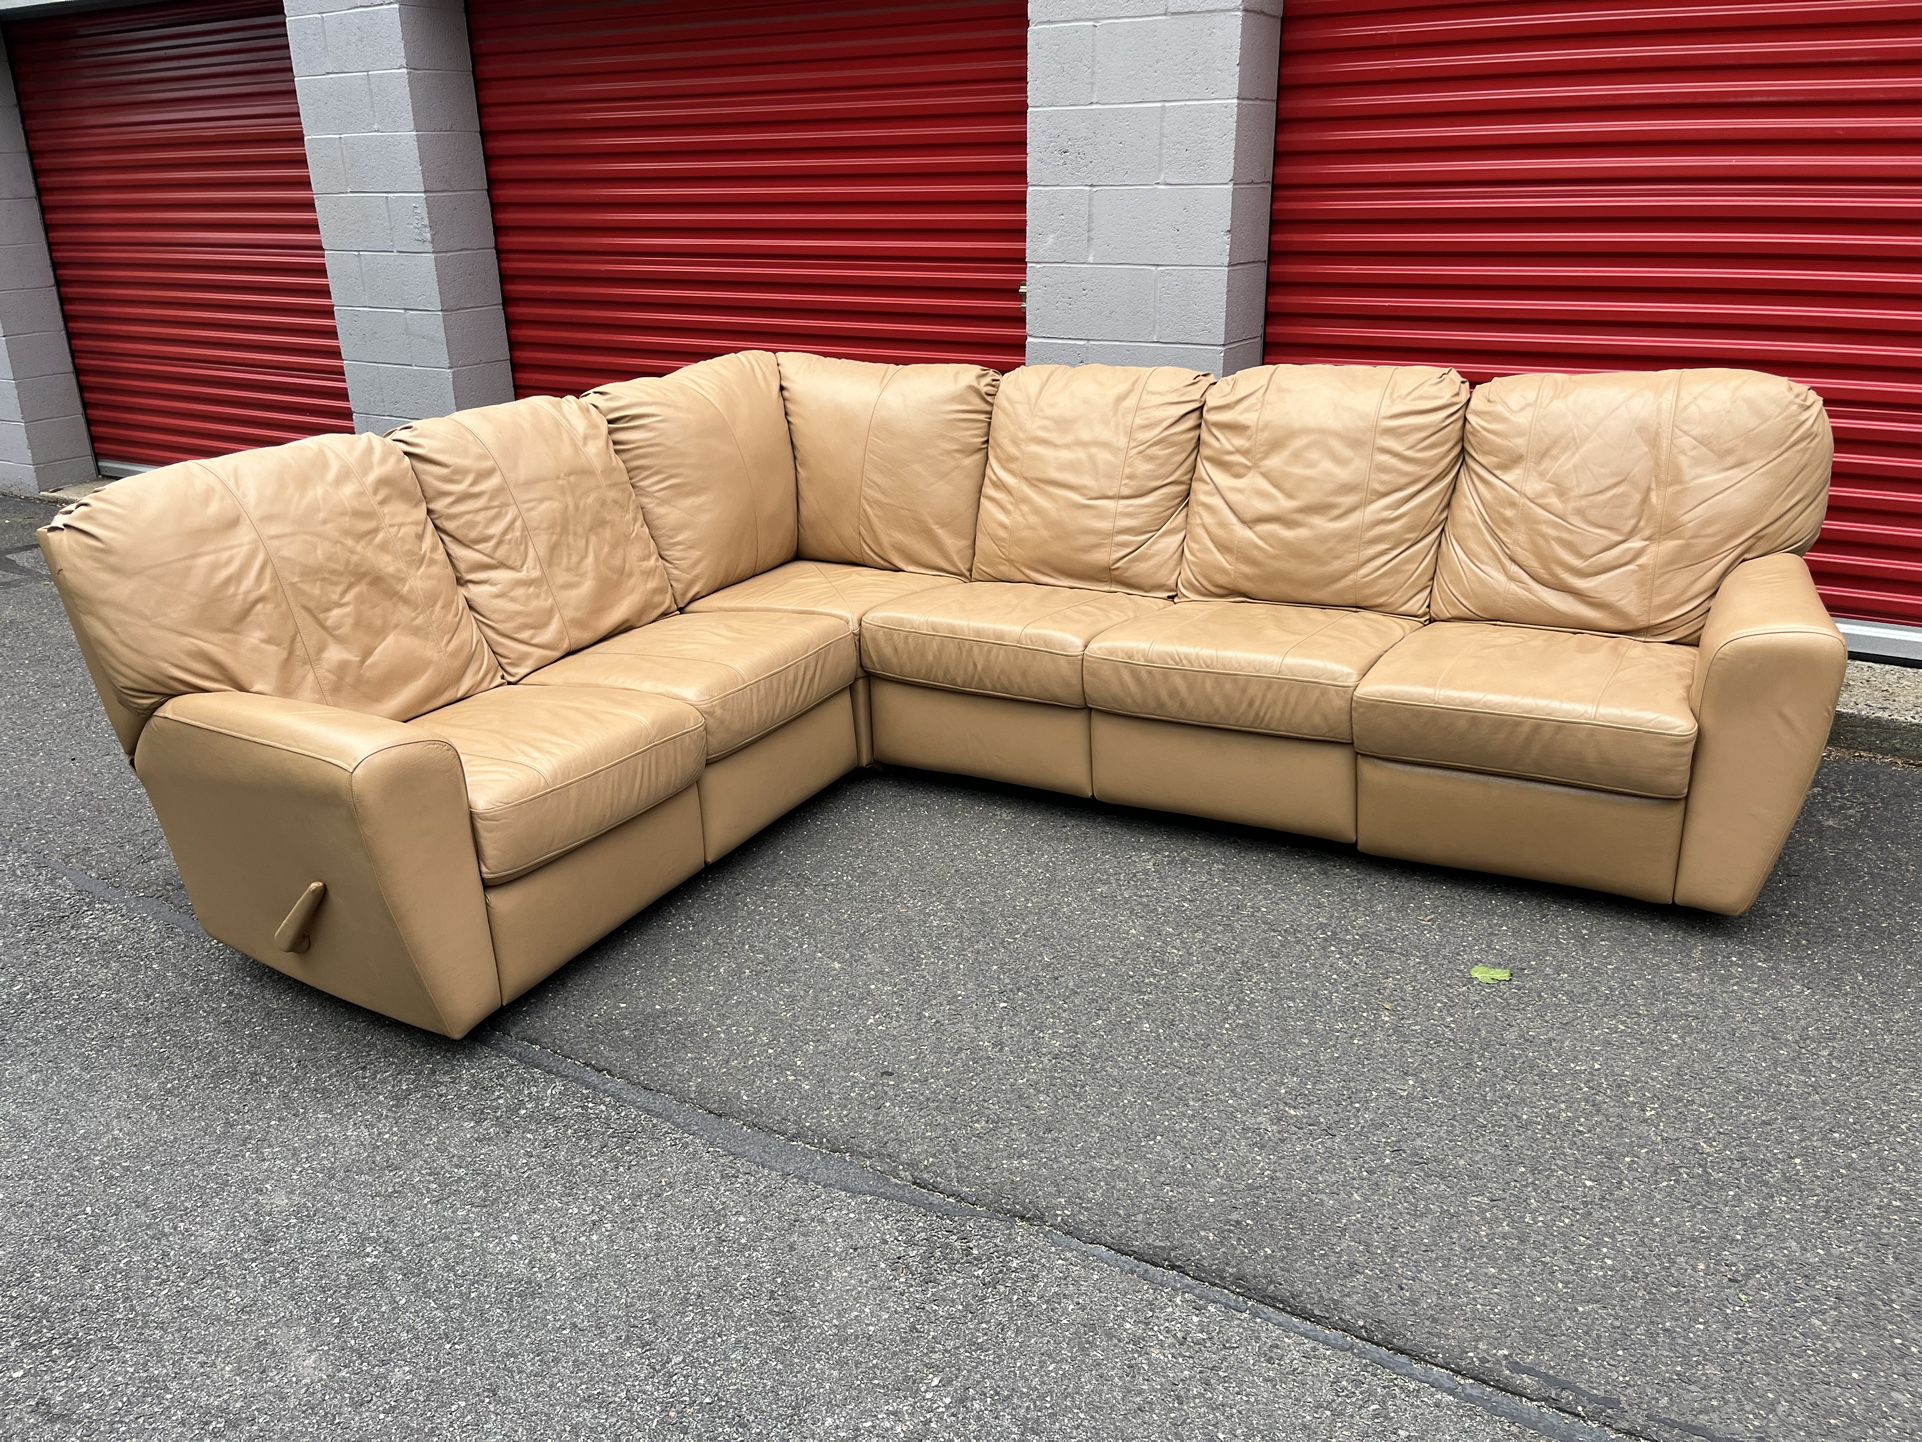 Vintage Beige Leather Recliner Sectional Couch